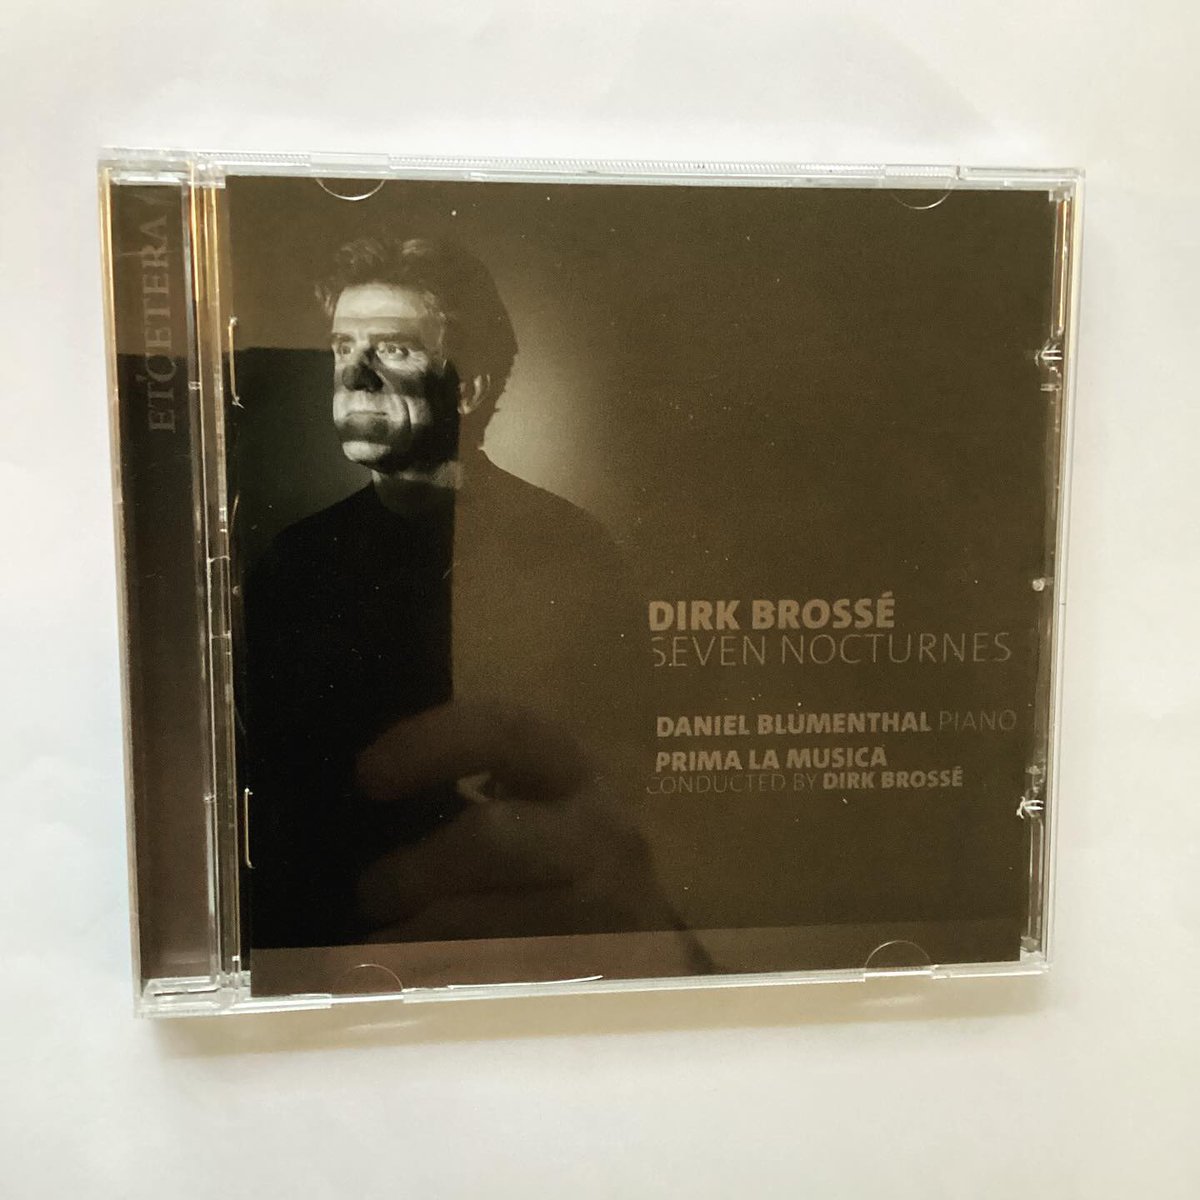 Belgian (film) composer Dirk Brossé has released a masterful album 'Seven Nocturnes', inspired by the days of the week, for the piano and the chamber orchestra.
#dirkbrossé #composer #composers #music #cd #chamberorchestra #belgium #belgian #gent #ghent